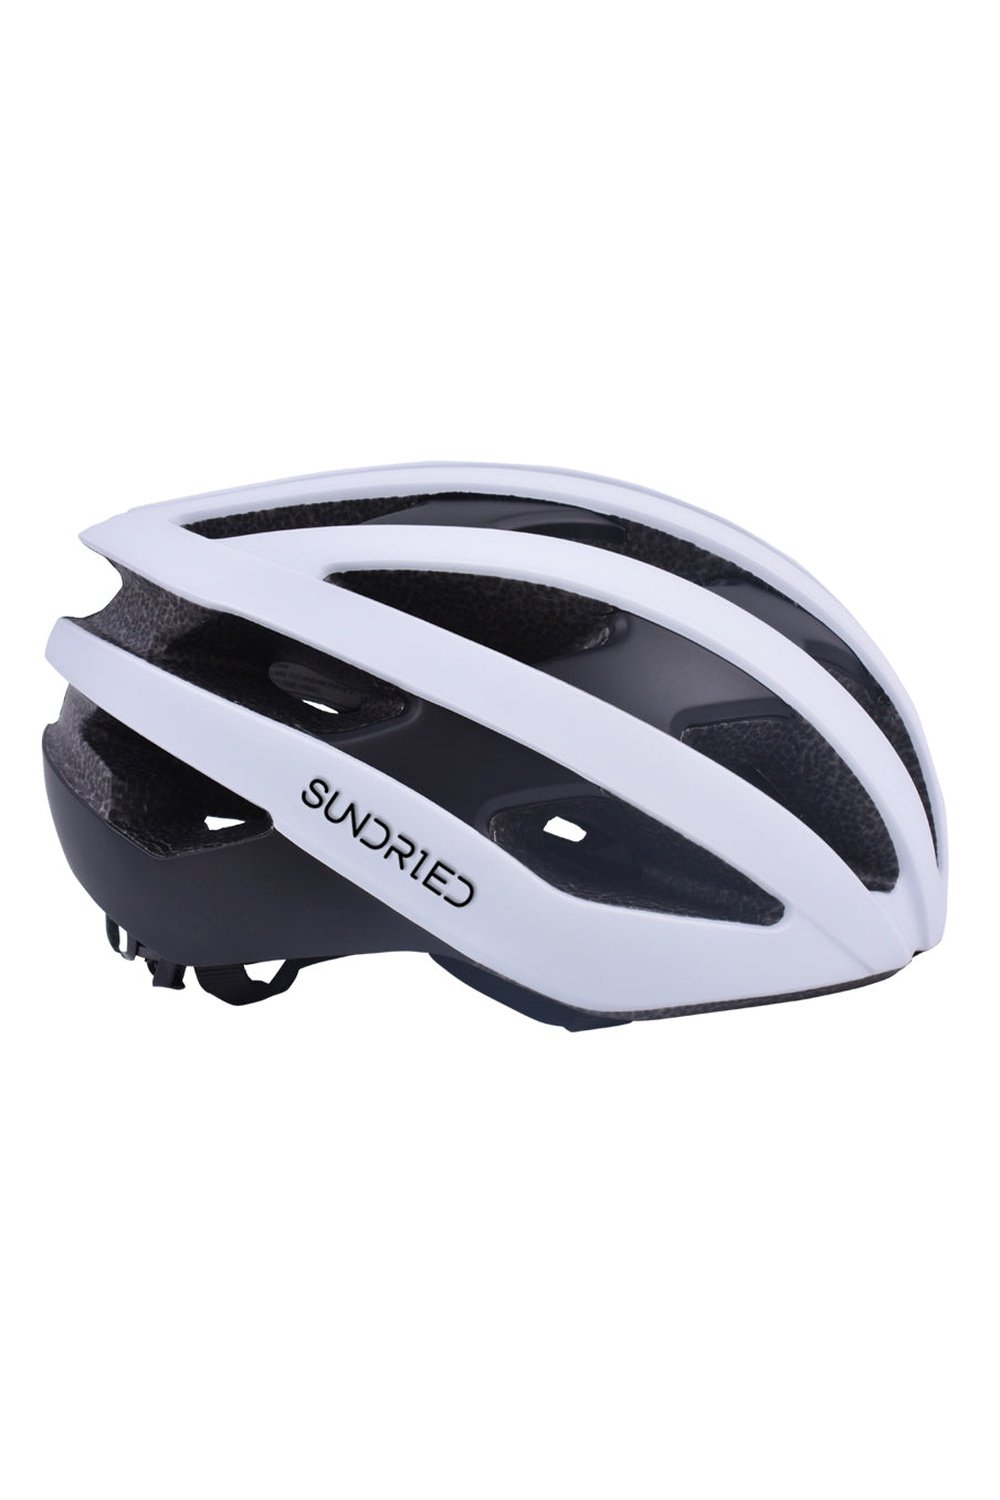 Sundried Ortler Road Cycle Helmet Helmet L White SD0385 L White Activewear